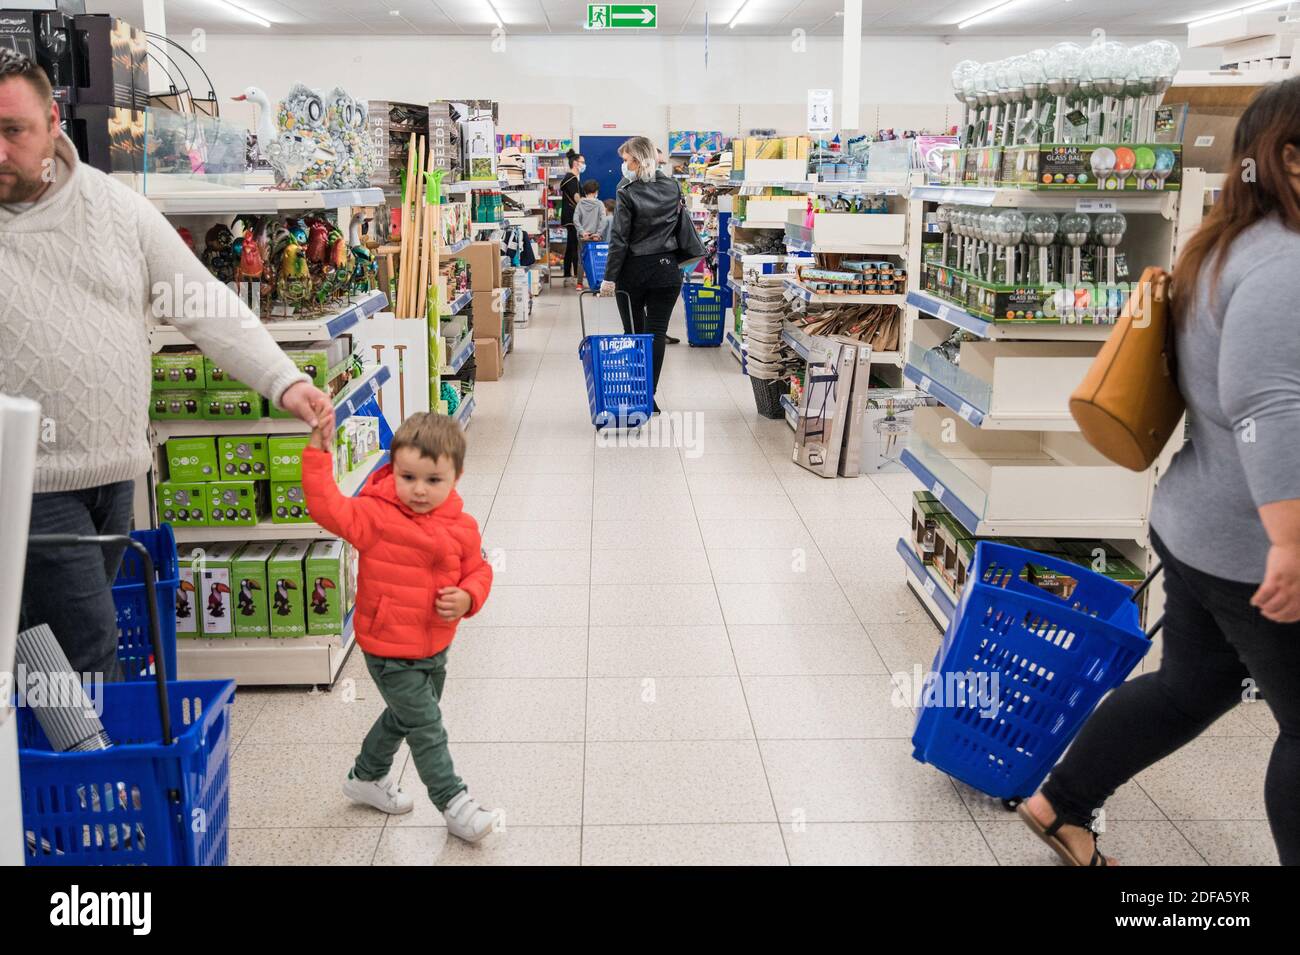 Customers carry trolleys at a Action supermarket on May 15, 2020 in Lambres -lez-Douai near Lens, after a partial lifting of restrictions due to the  Covid-19 pandemic caused by the novel coronavirus came